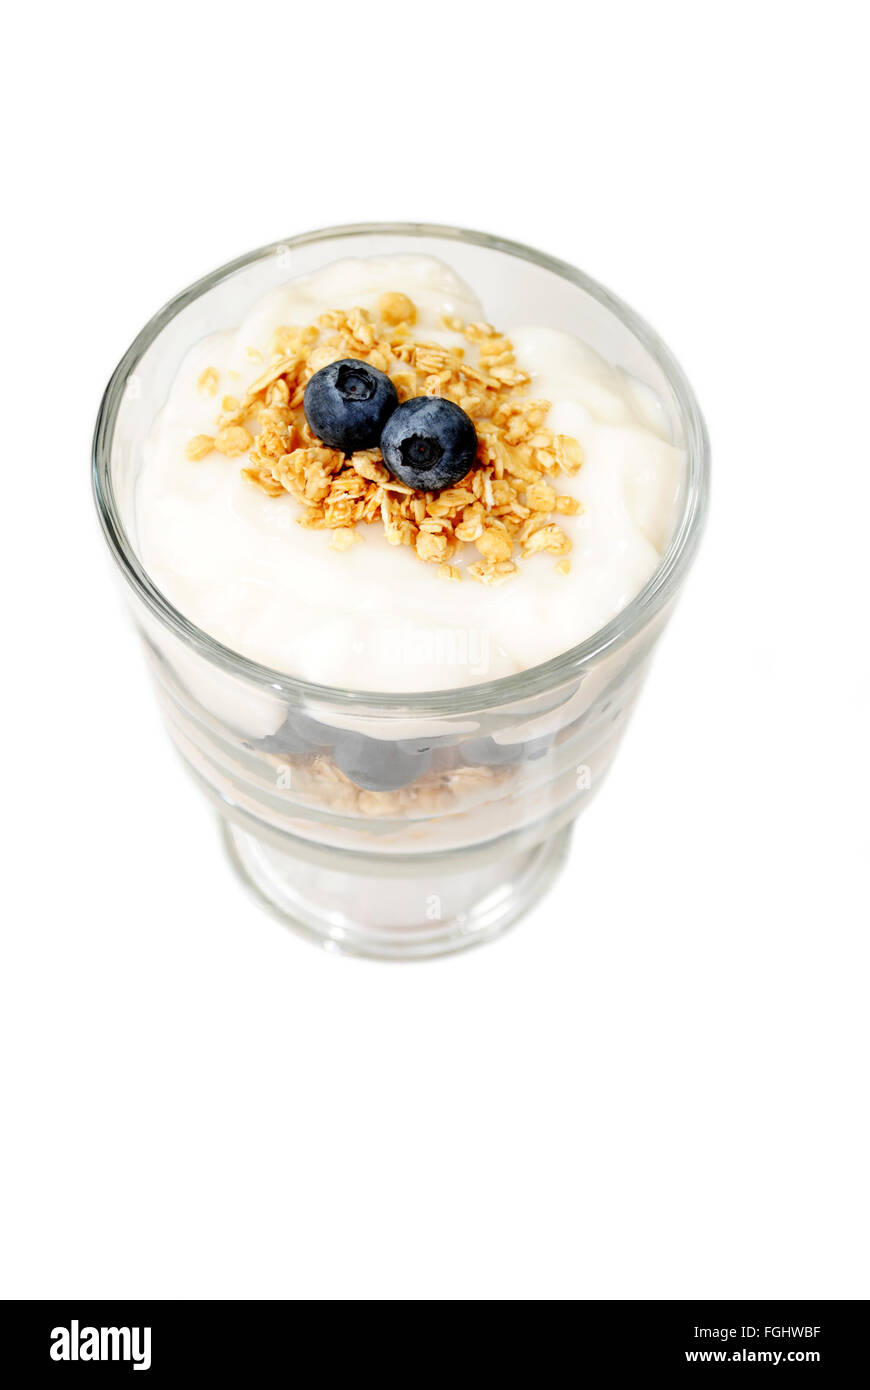 Glass Container Filled with Yogurt, Berries and Oats Stock Photo